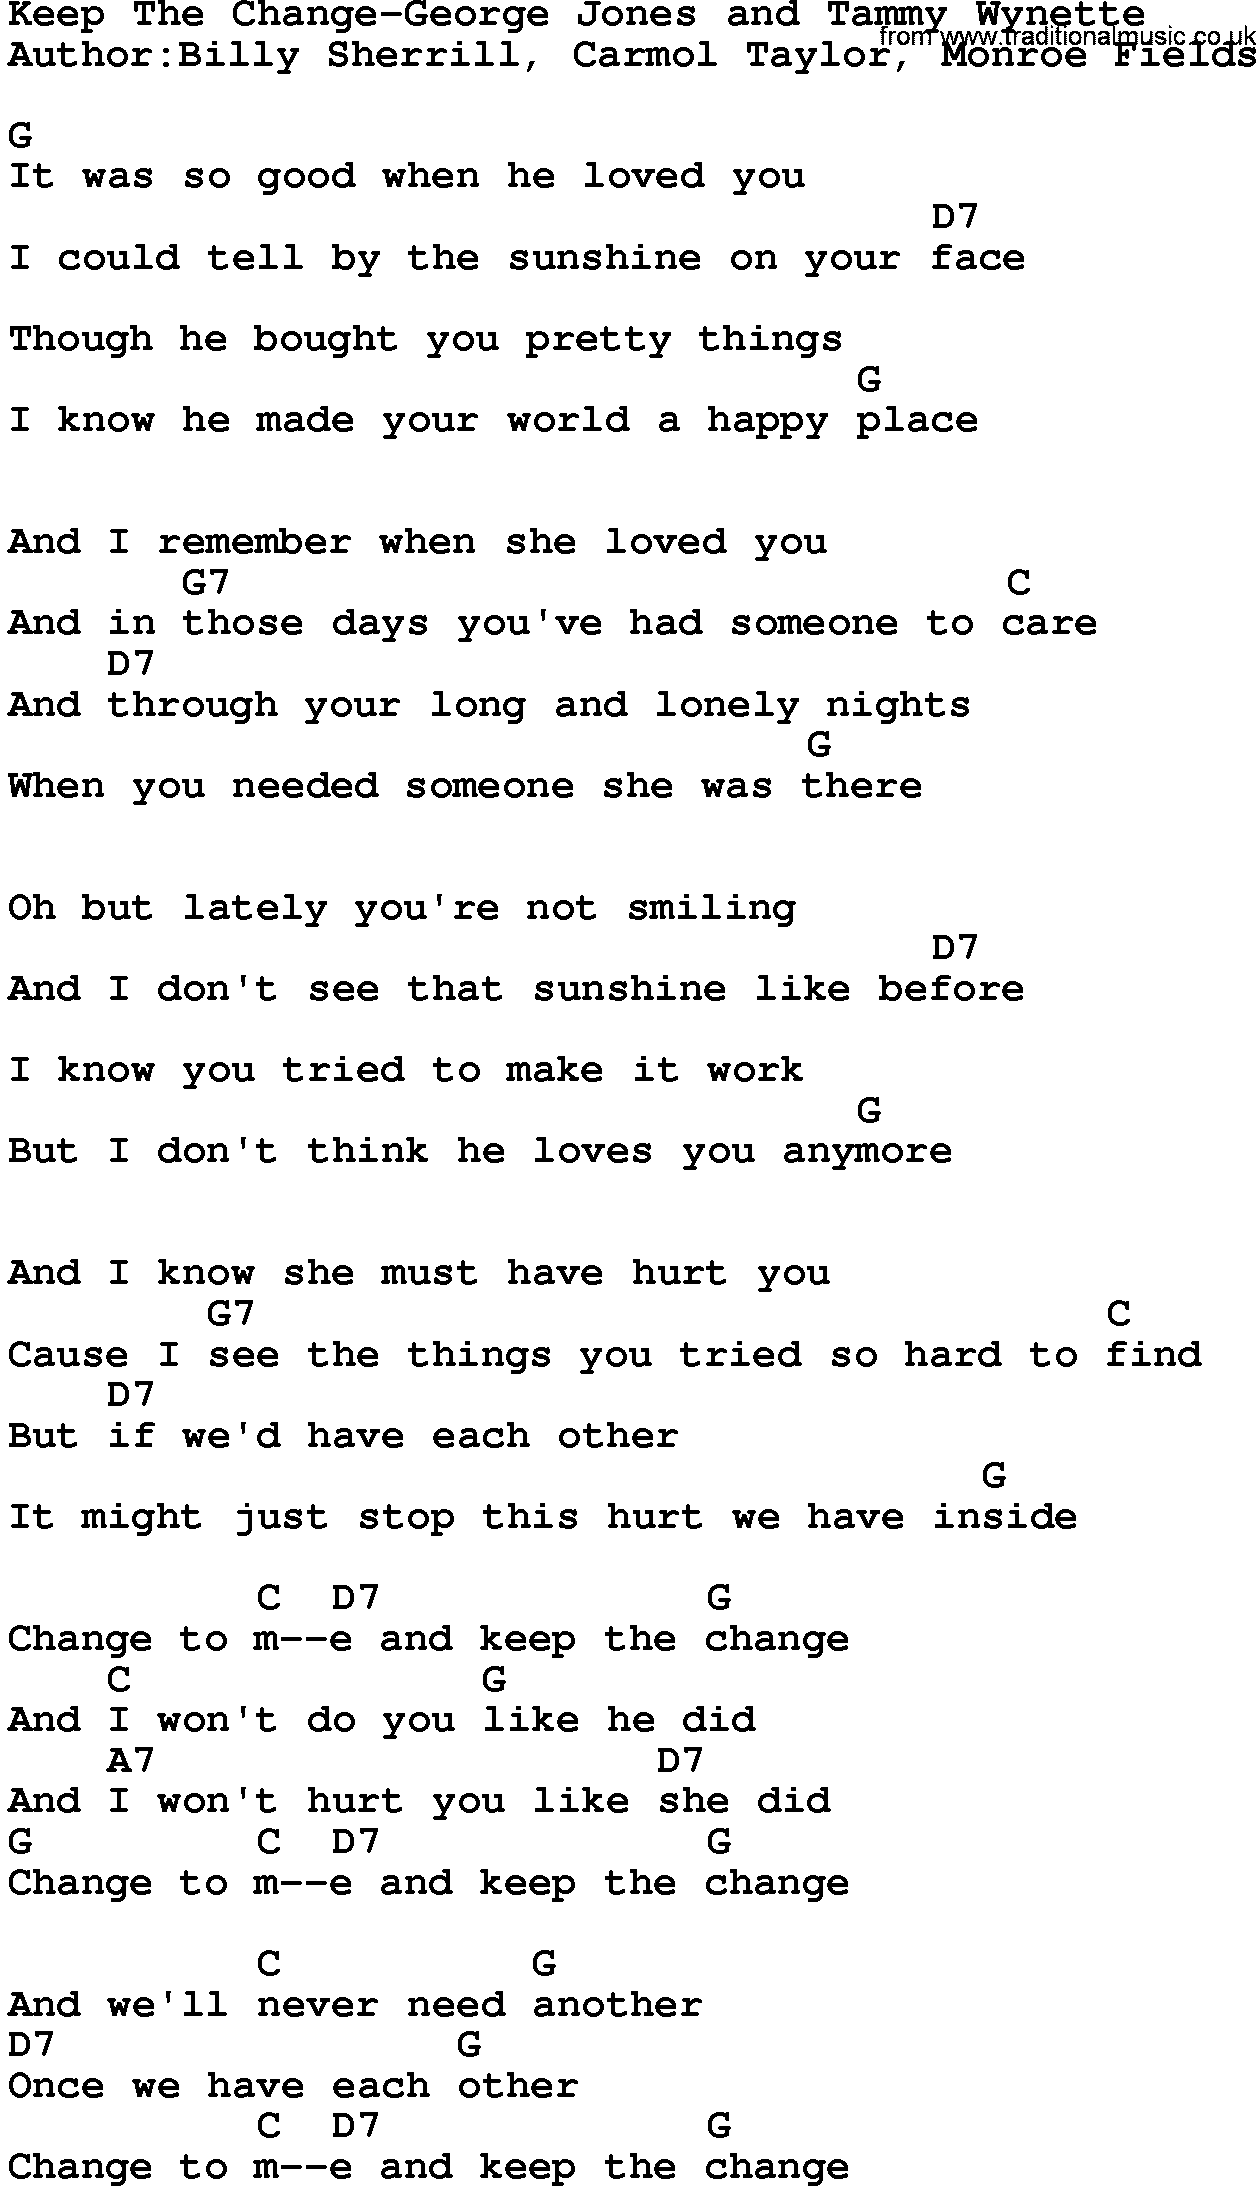 Country music song: Keep The Change-George Jones And Tammy Wynette lyrics and chords